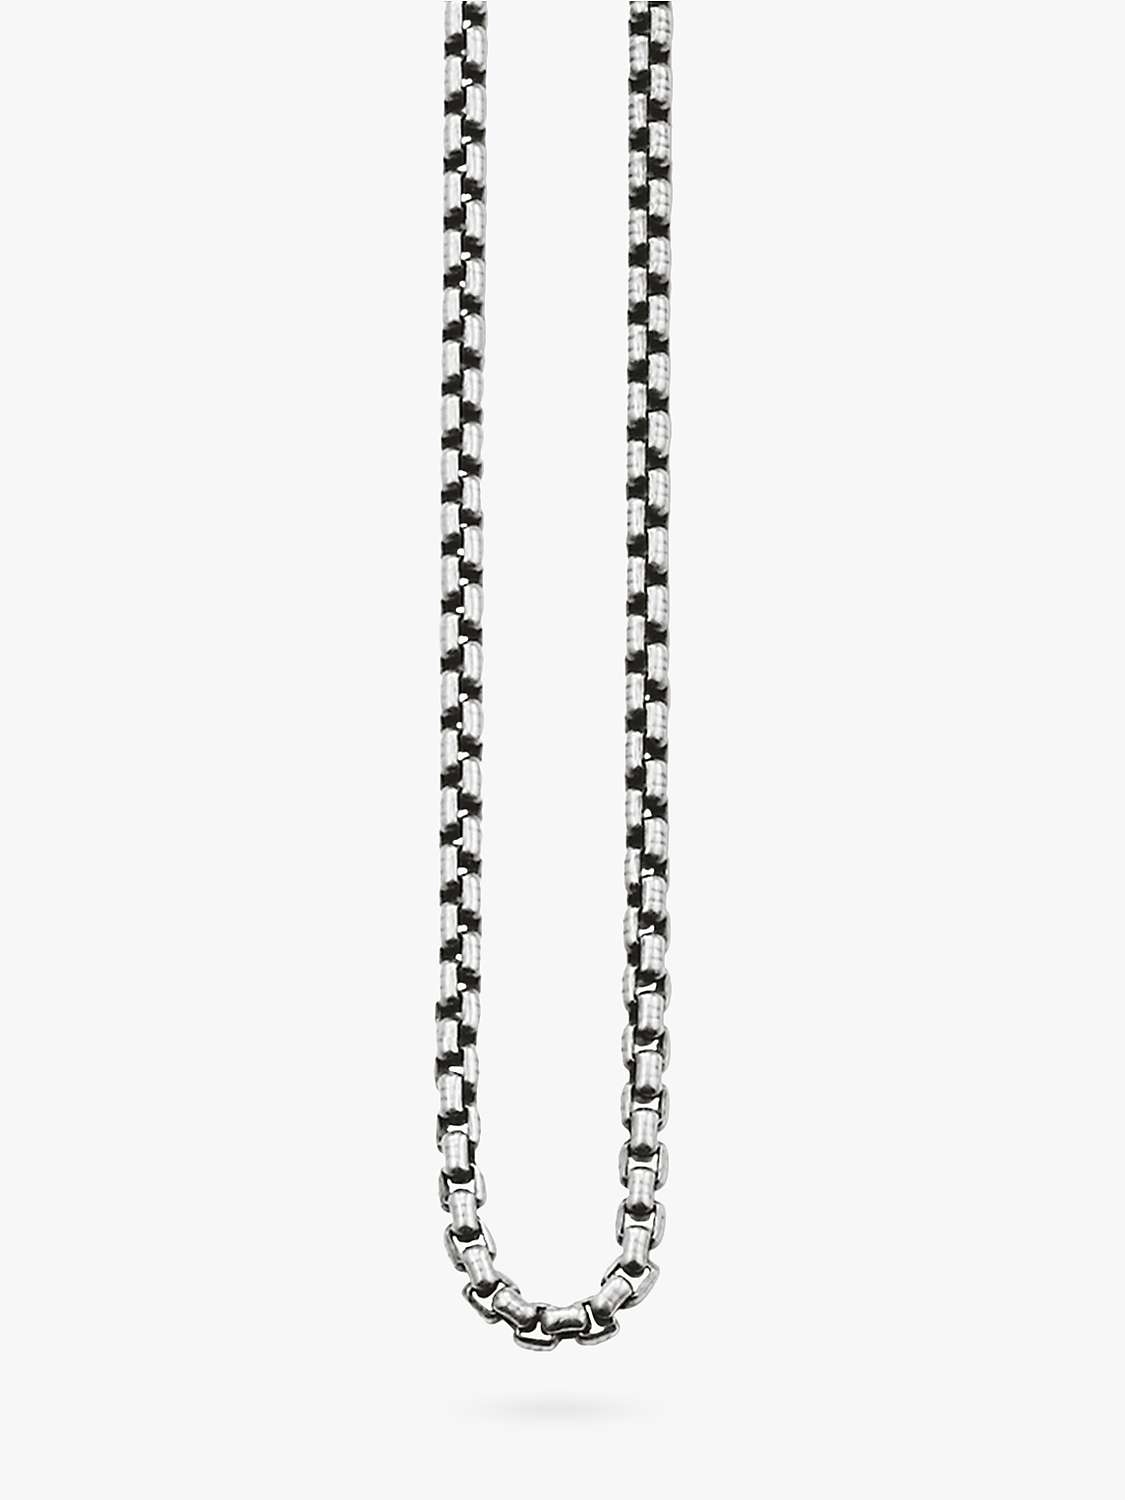 Buy THOMAS SABO Men's Chain Necklace, Silver Online at johnlewis.com